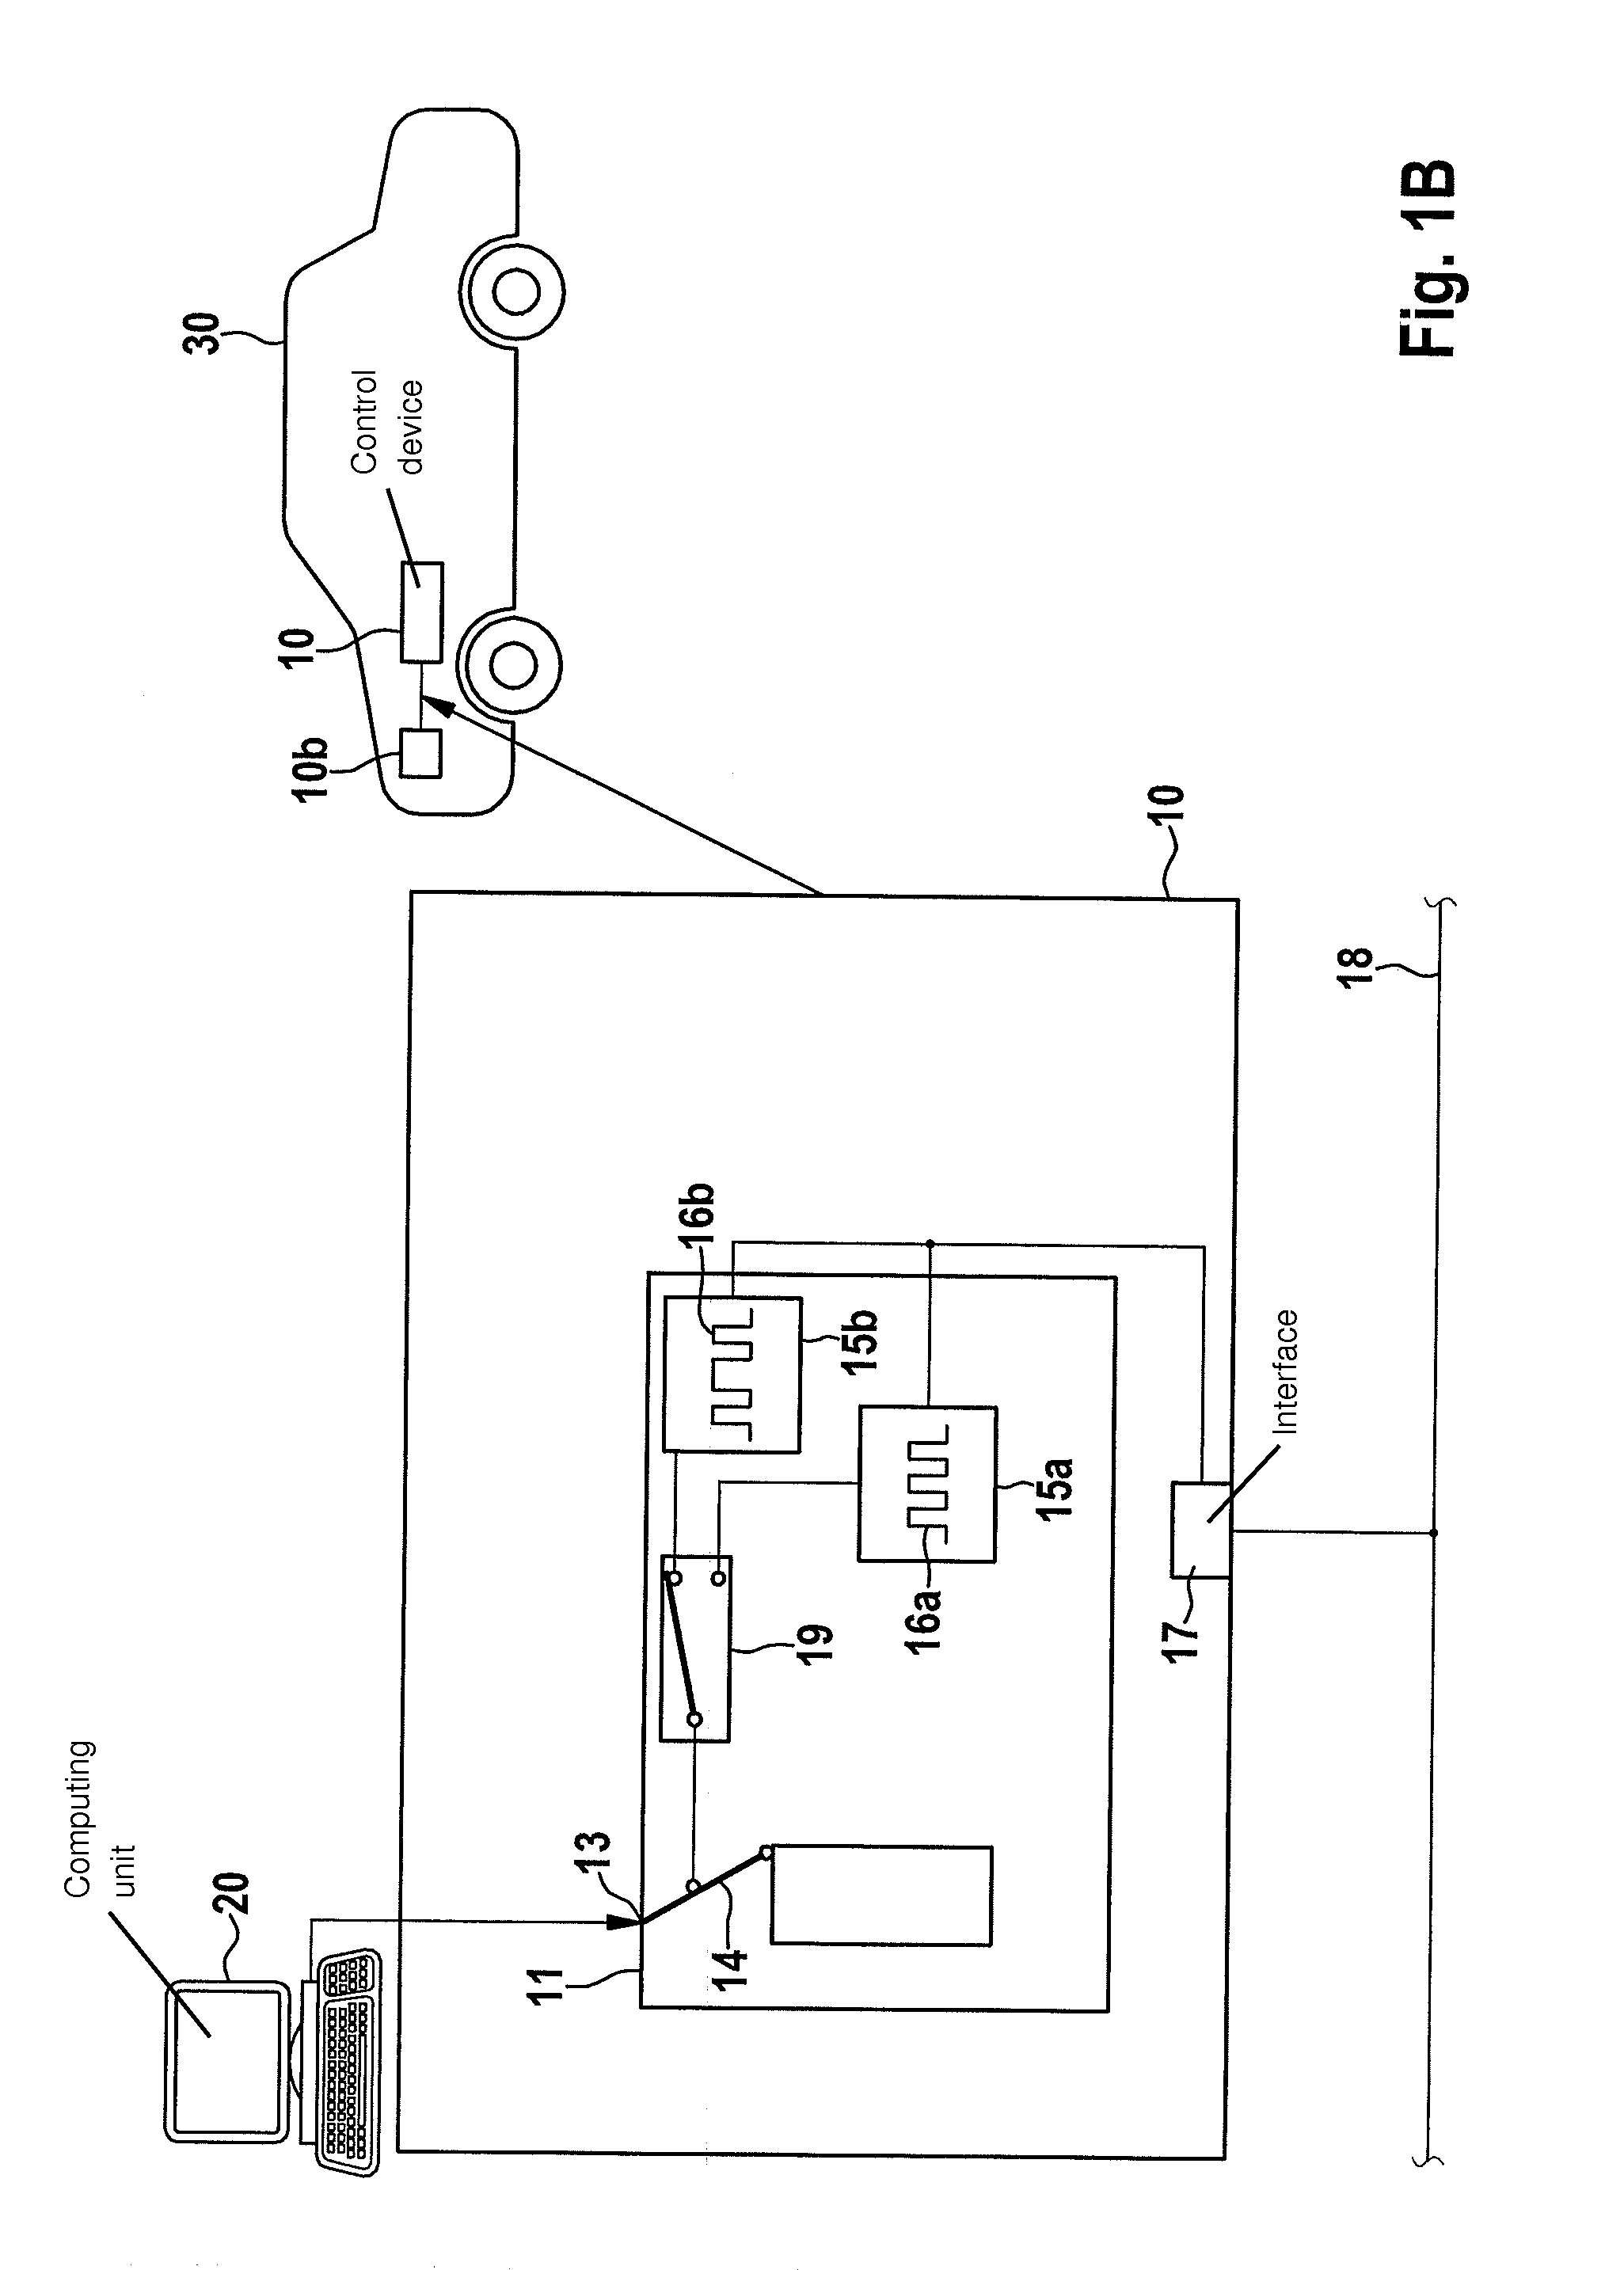 Active functional limiting of a microcontroller